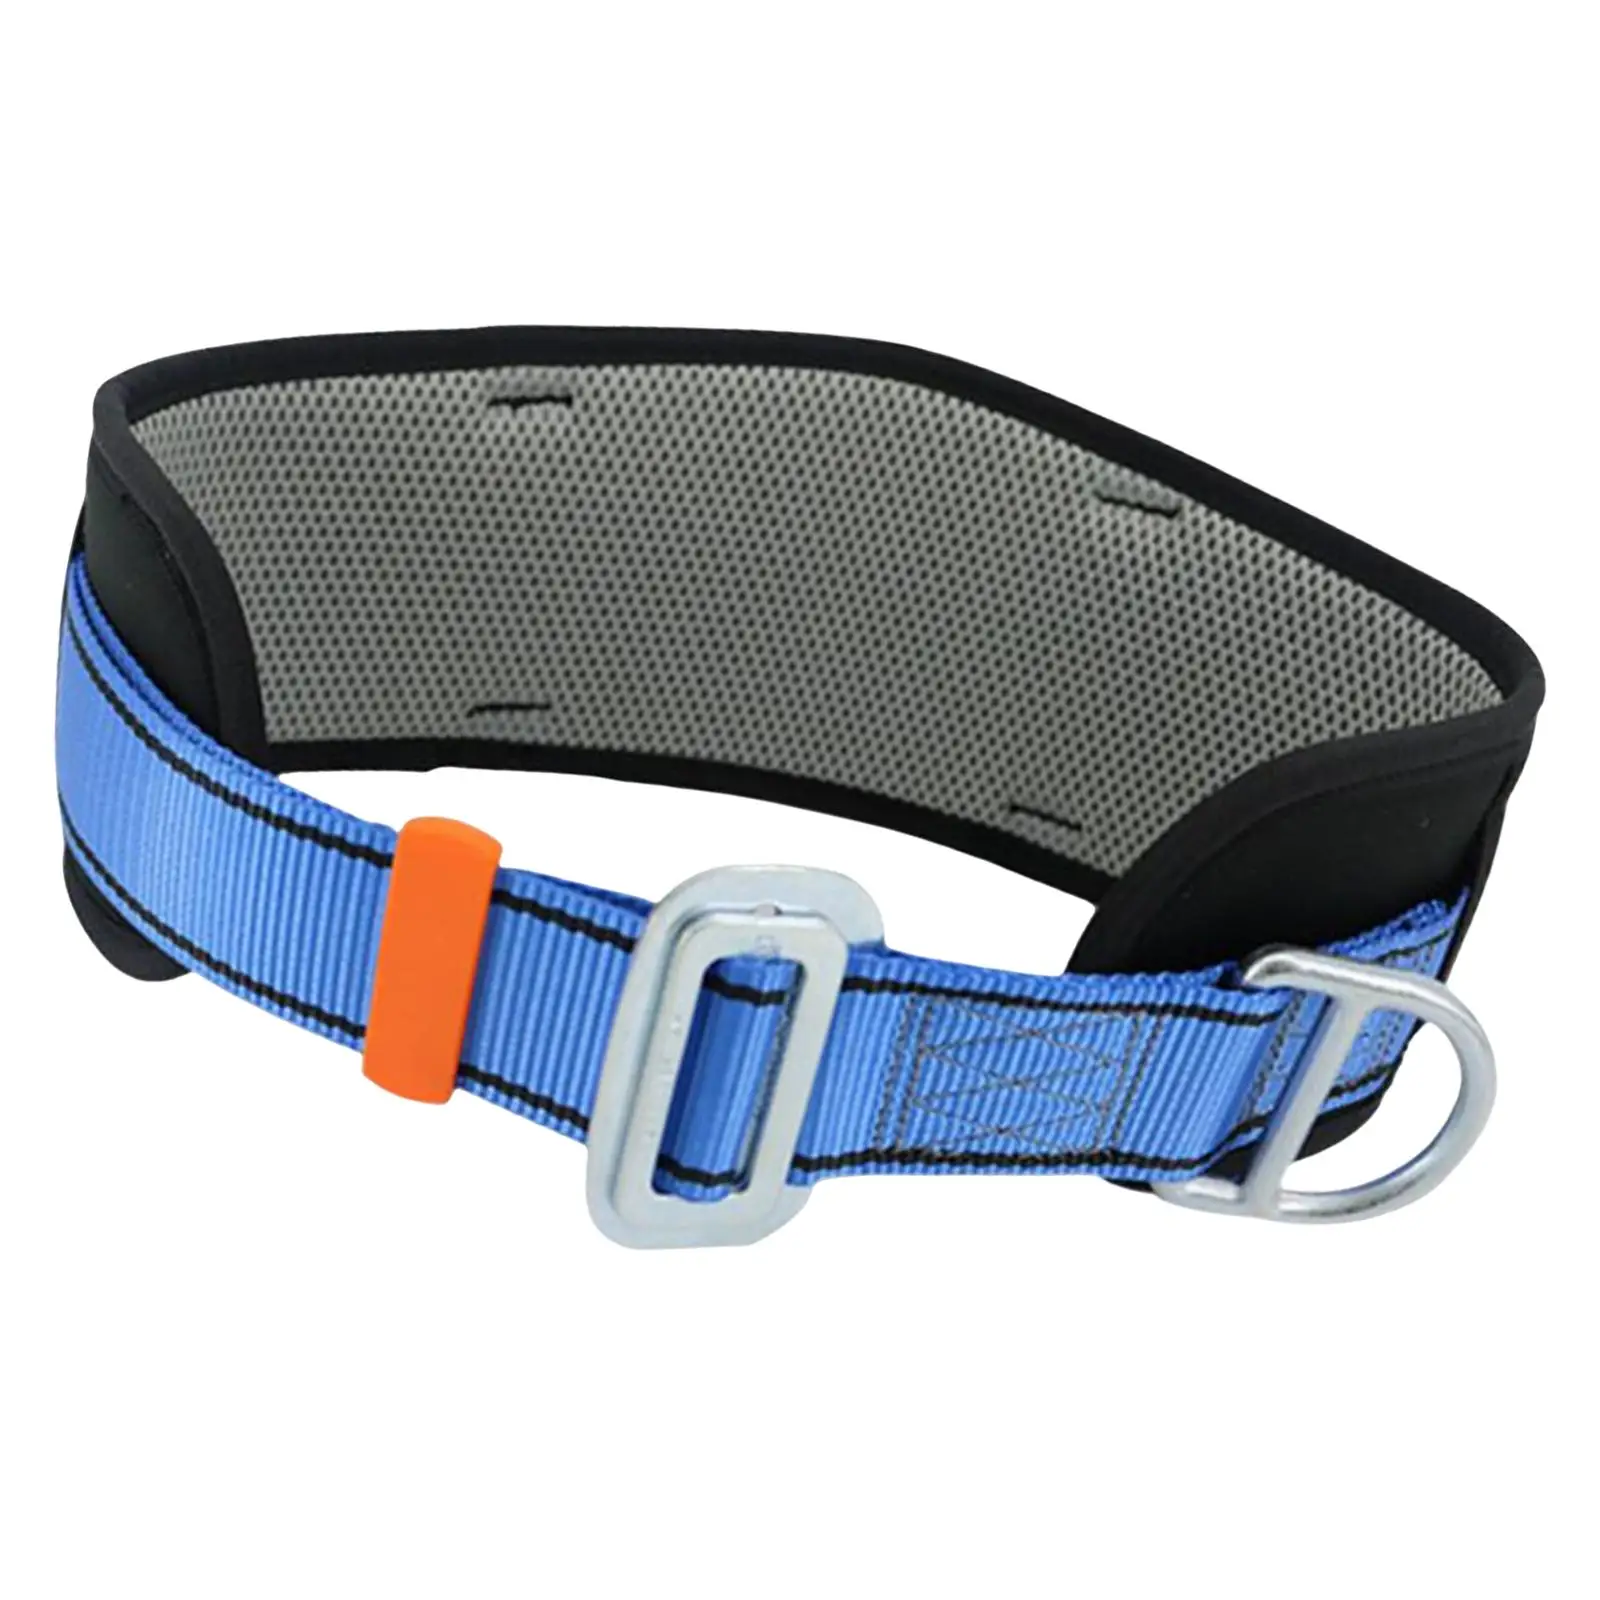 Single Hanging Point Anti Falling Lightweight Safety Harness Belt for Rescue